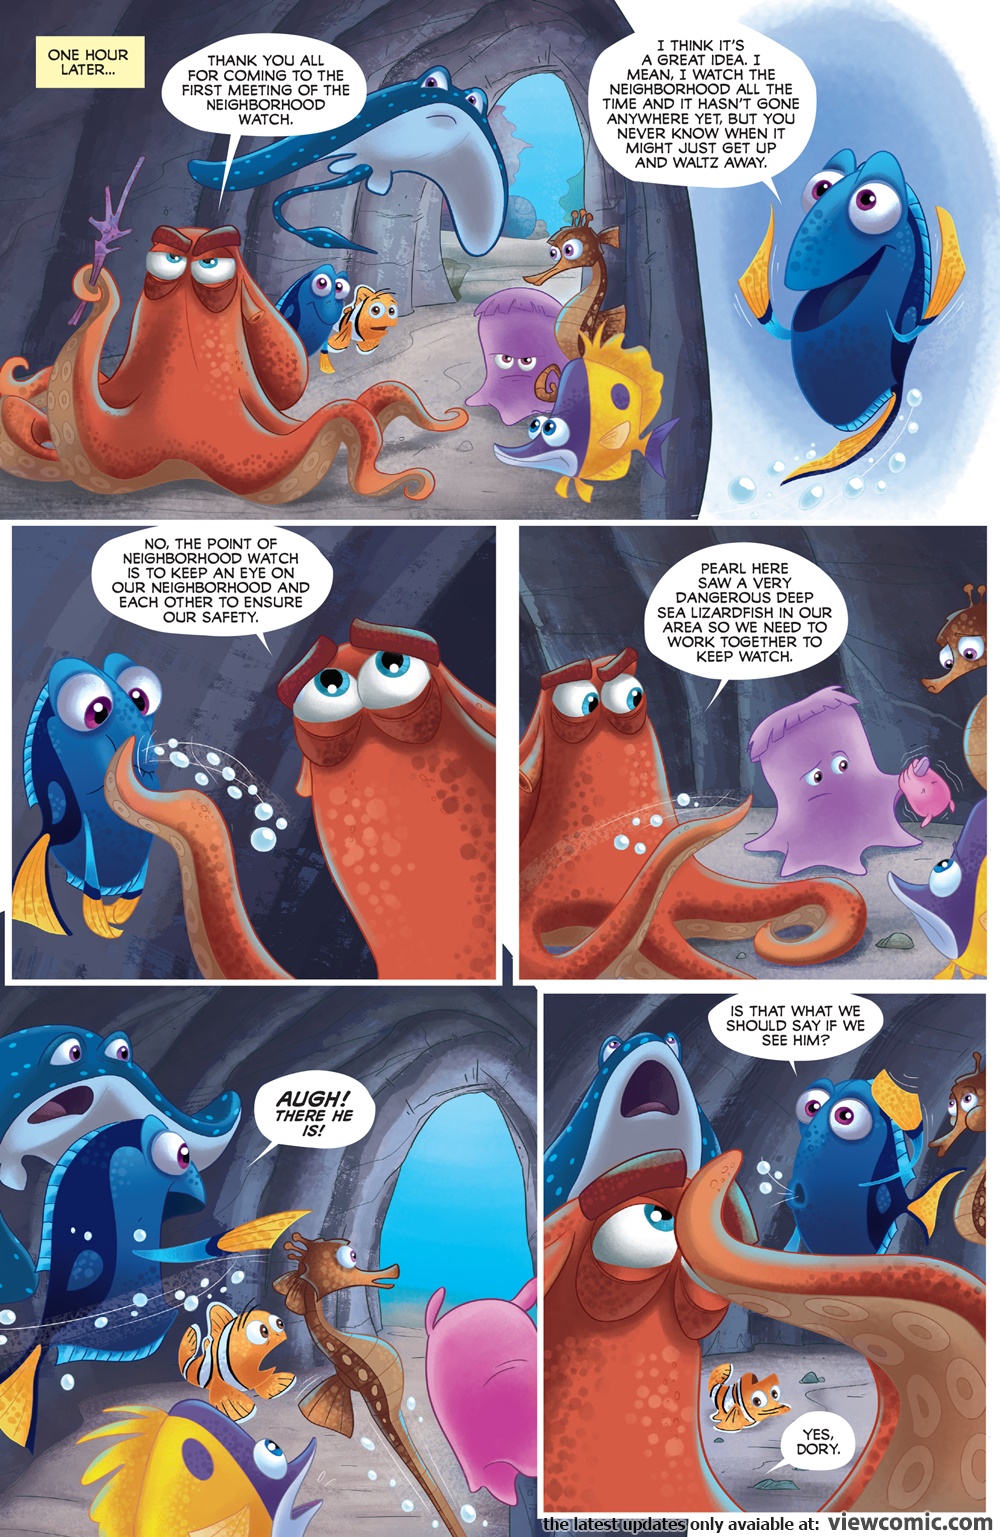 Finding Nemo Porn Comic - Disney Pixar Finding Dory 001 2017 | Read Disney Pixar Finding Dory 001  2017 comic online in high quality. Read Full Comic online for free - Read  comics online in high quality .